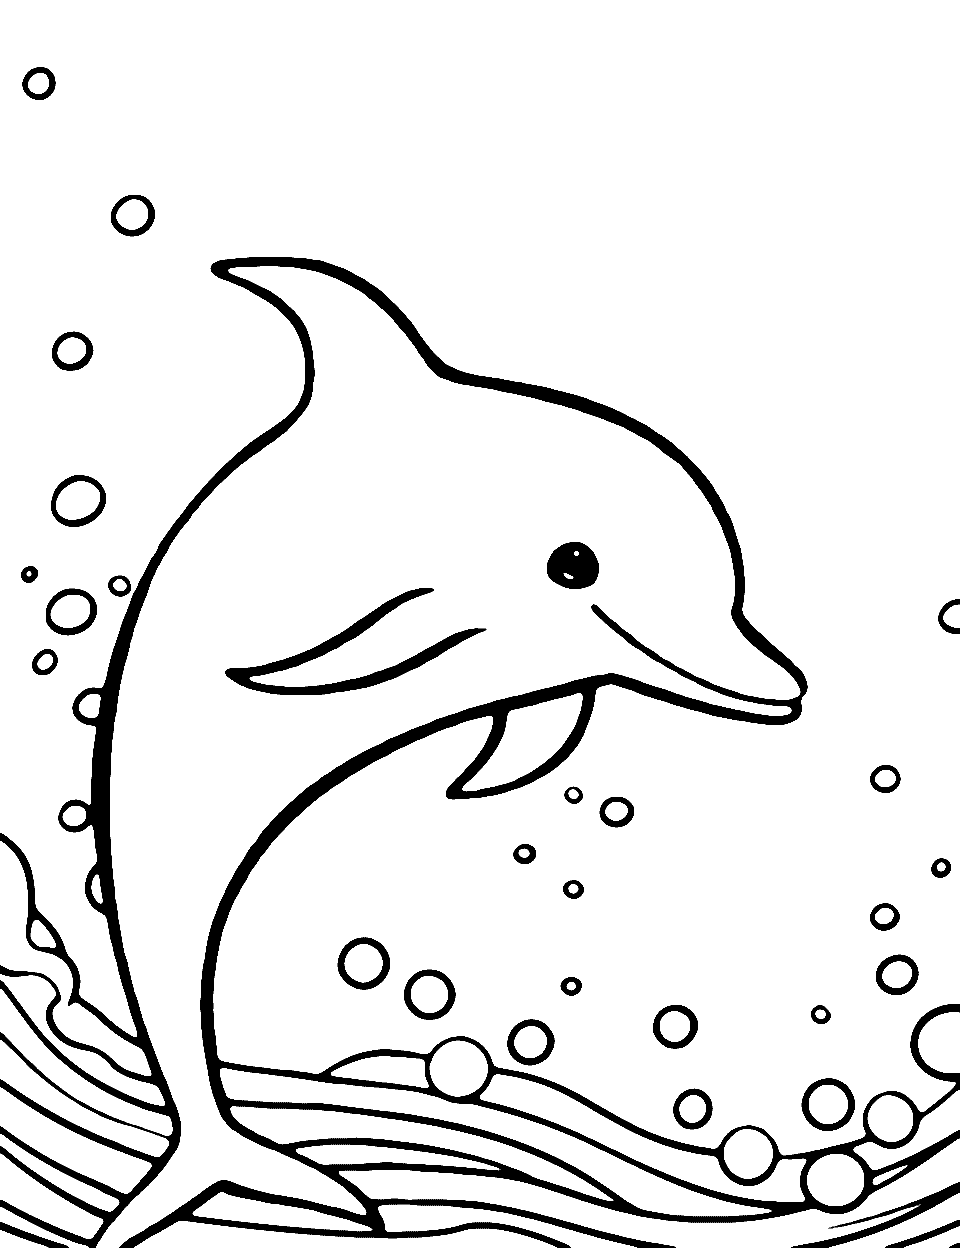 Preschool Dolphin Fun Coloring Page - A simple, yet adorable dolphin, perfect for preschoolers to color, surrounded by minimal ocean waves.